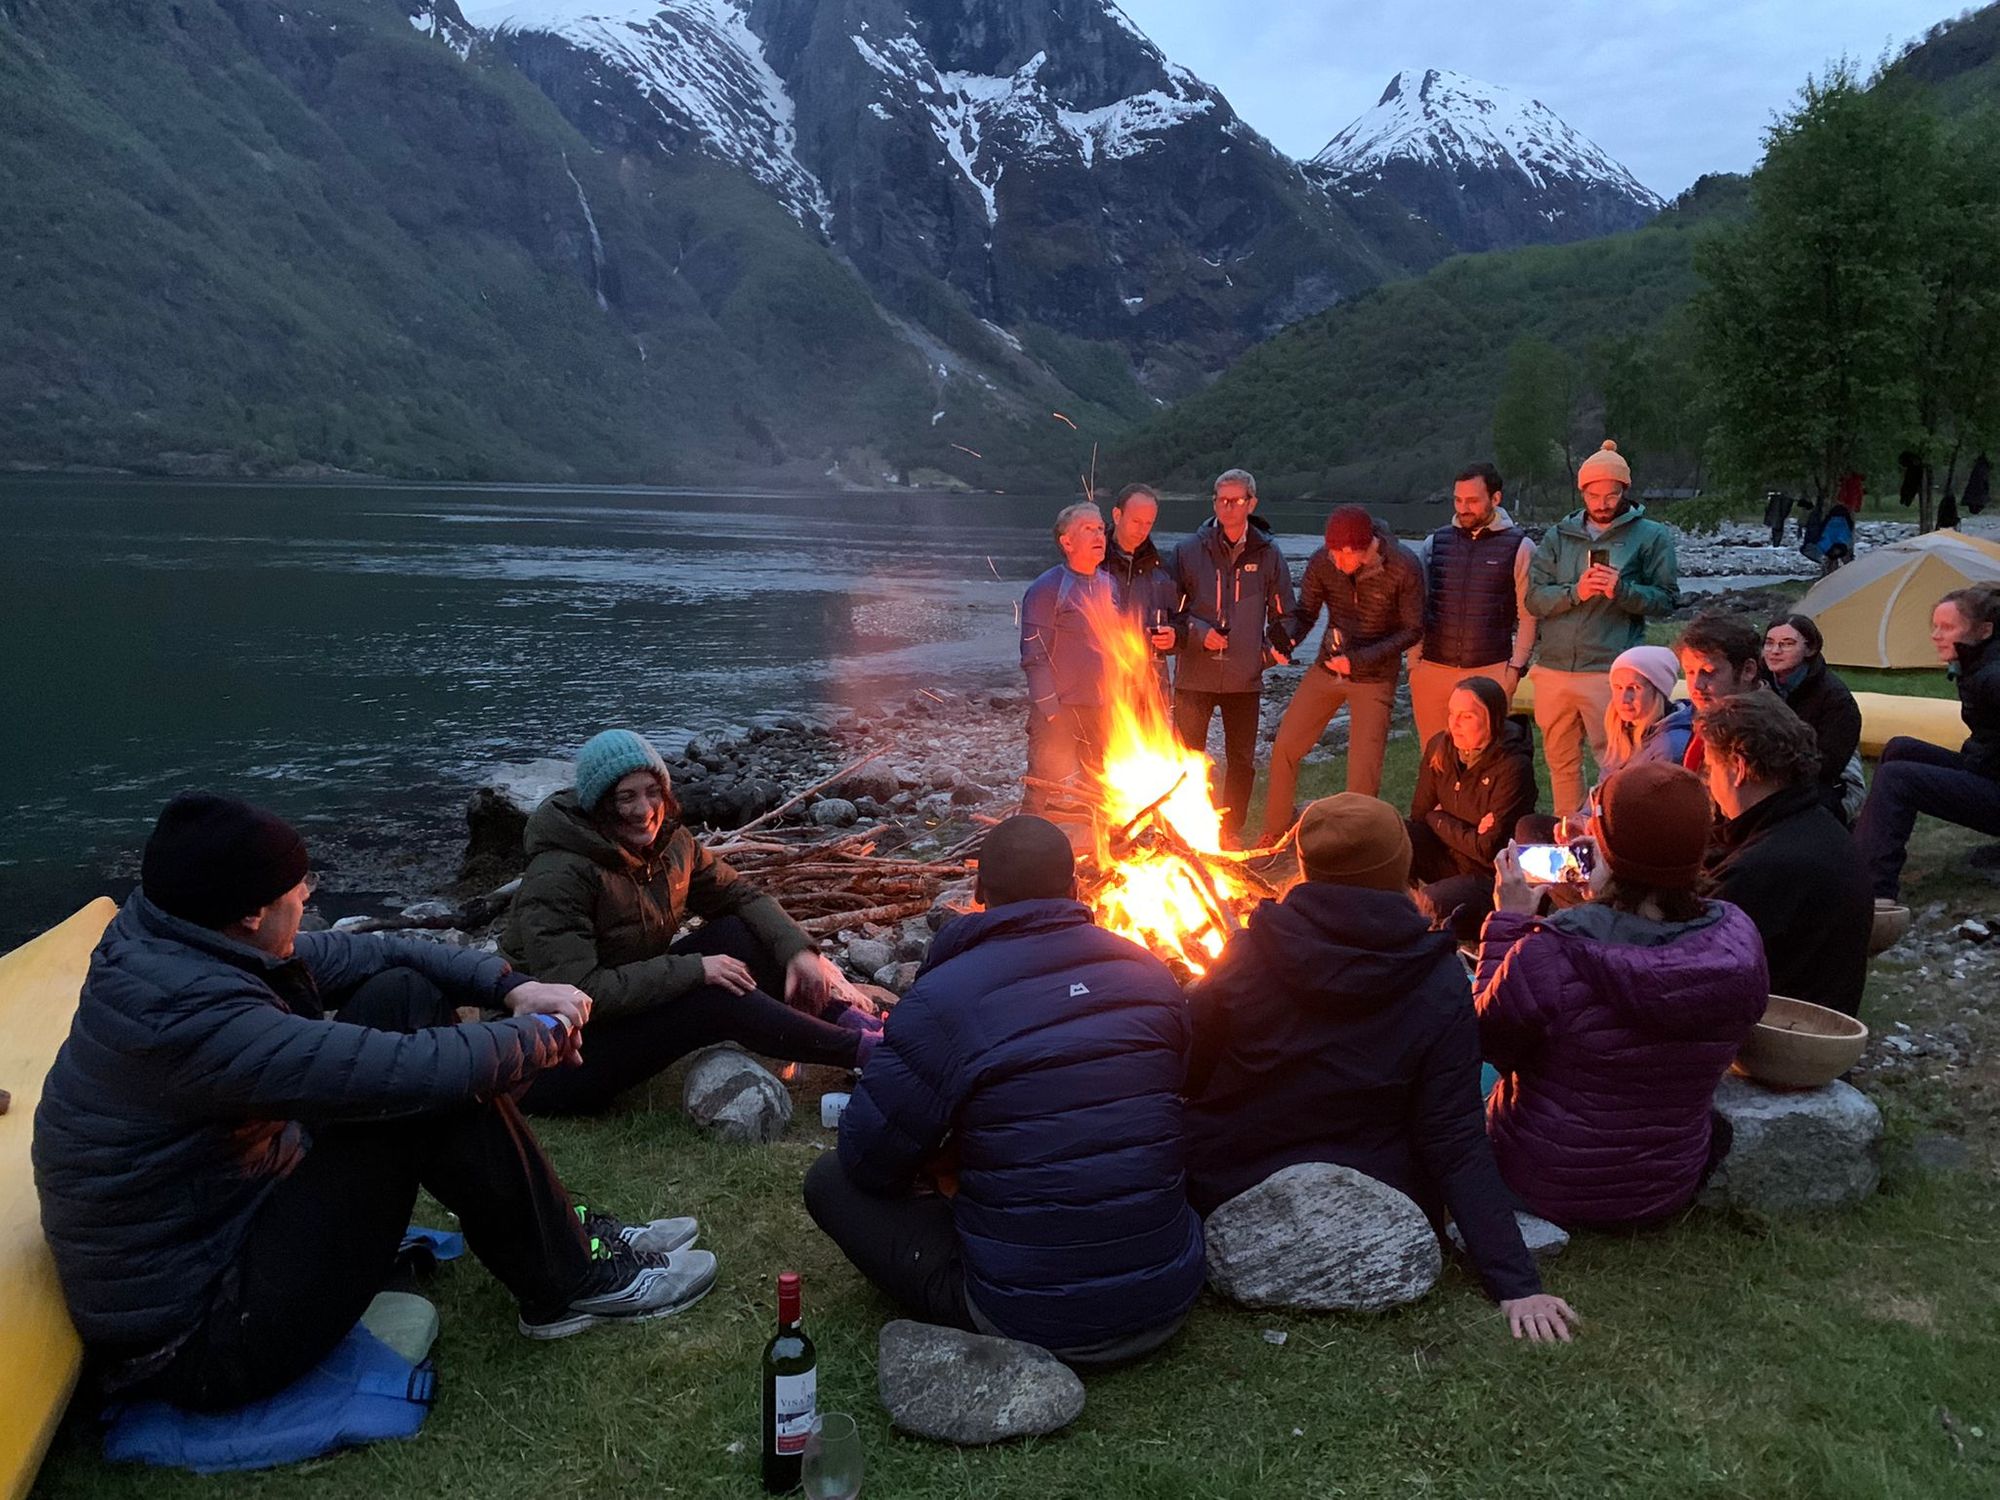 A kayaking group relaxing around the campfire of the Norwegian fjords.